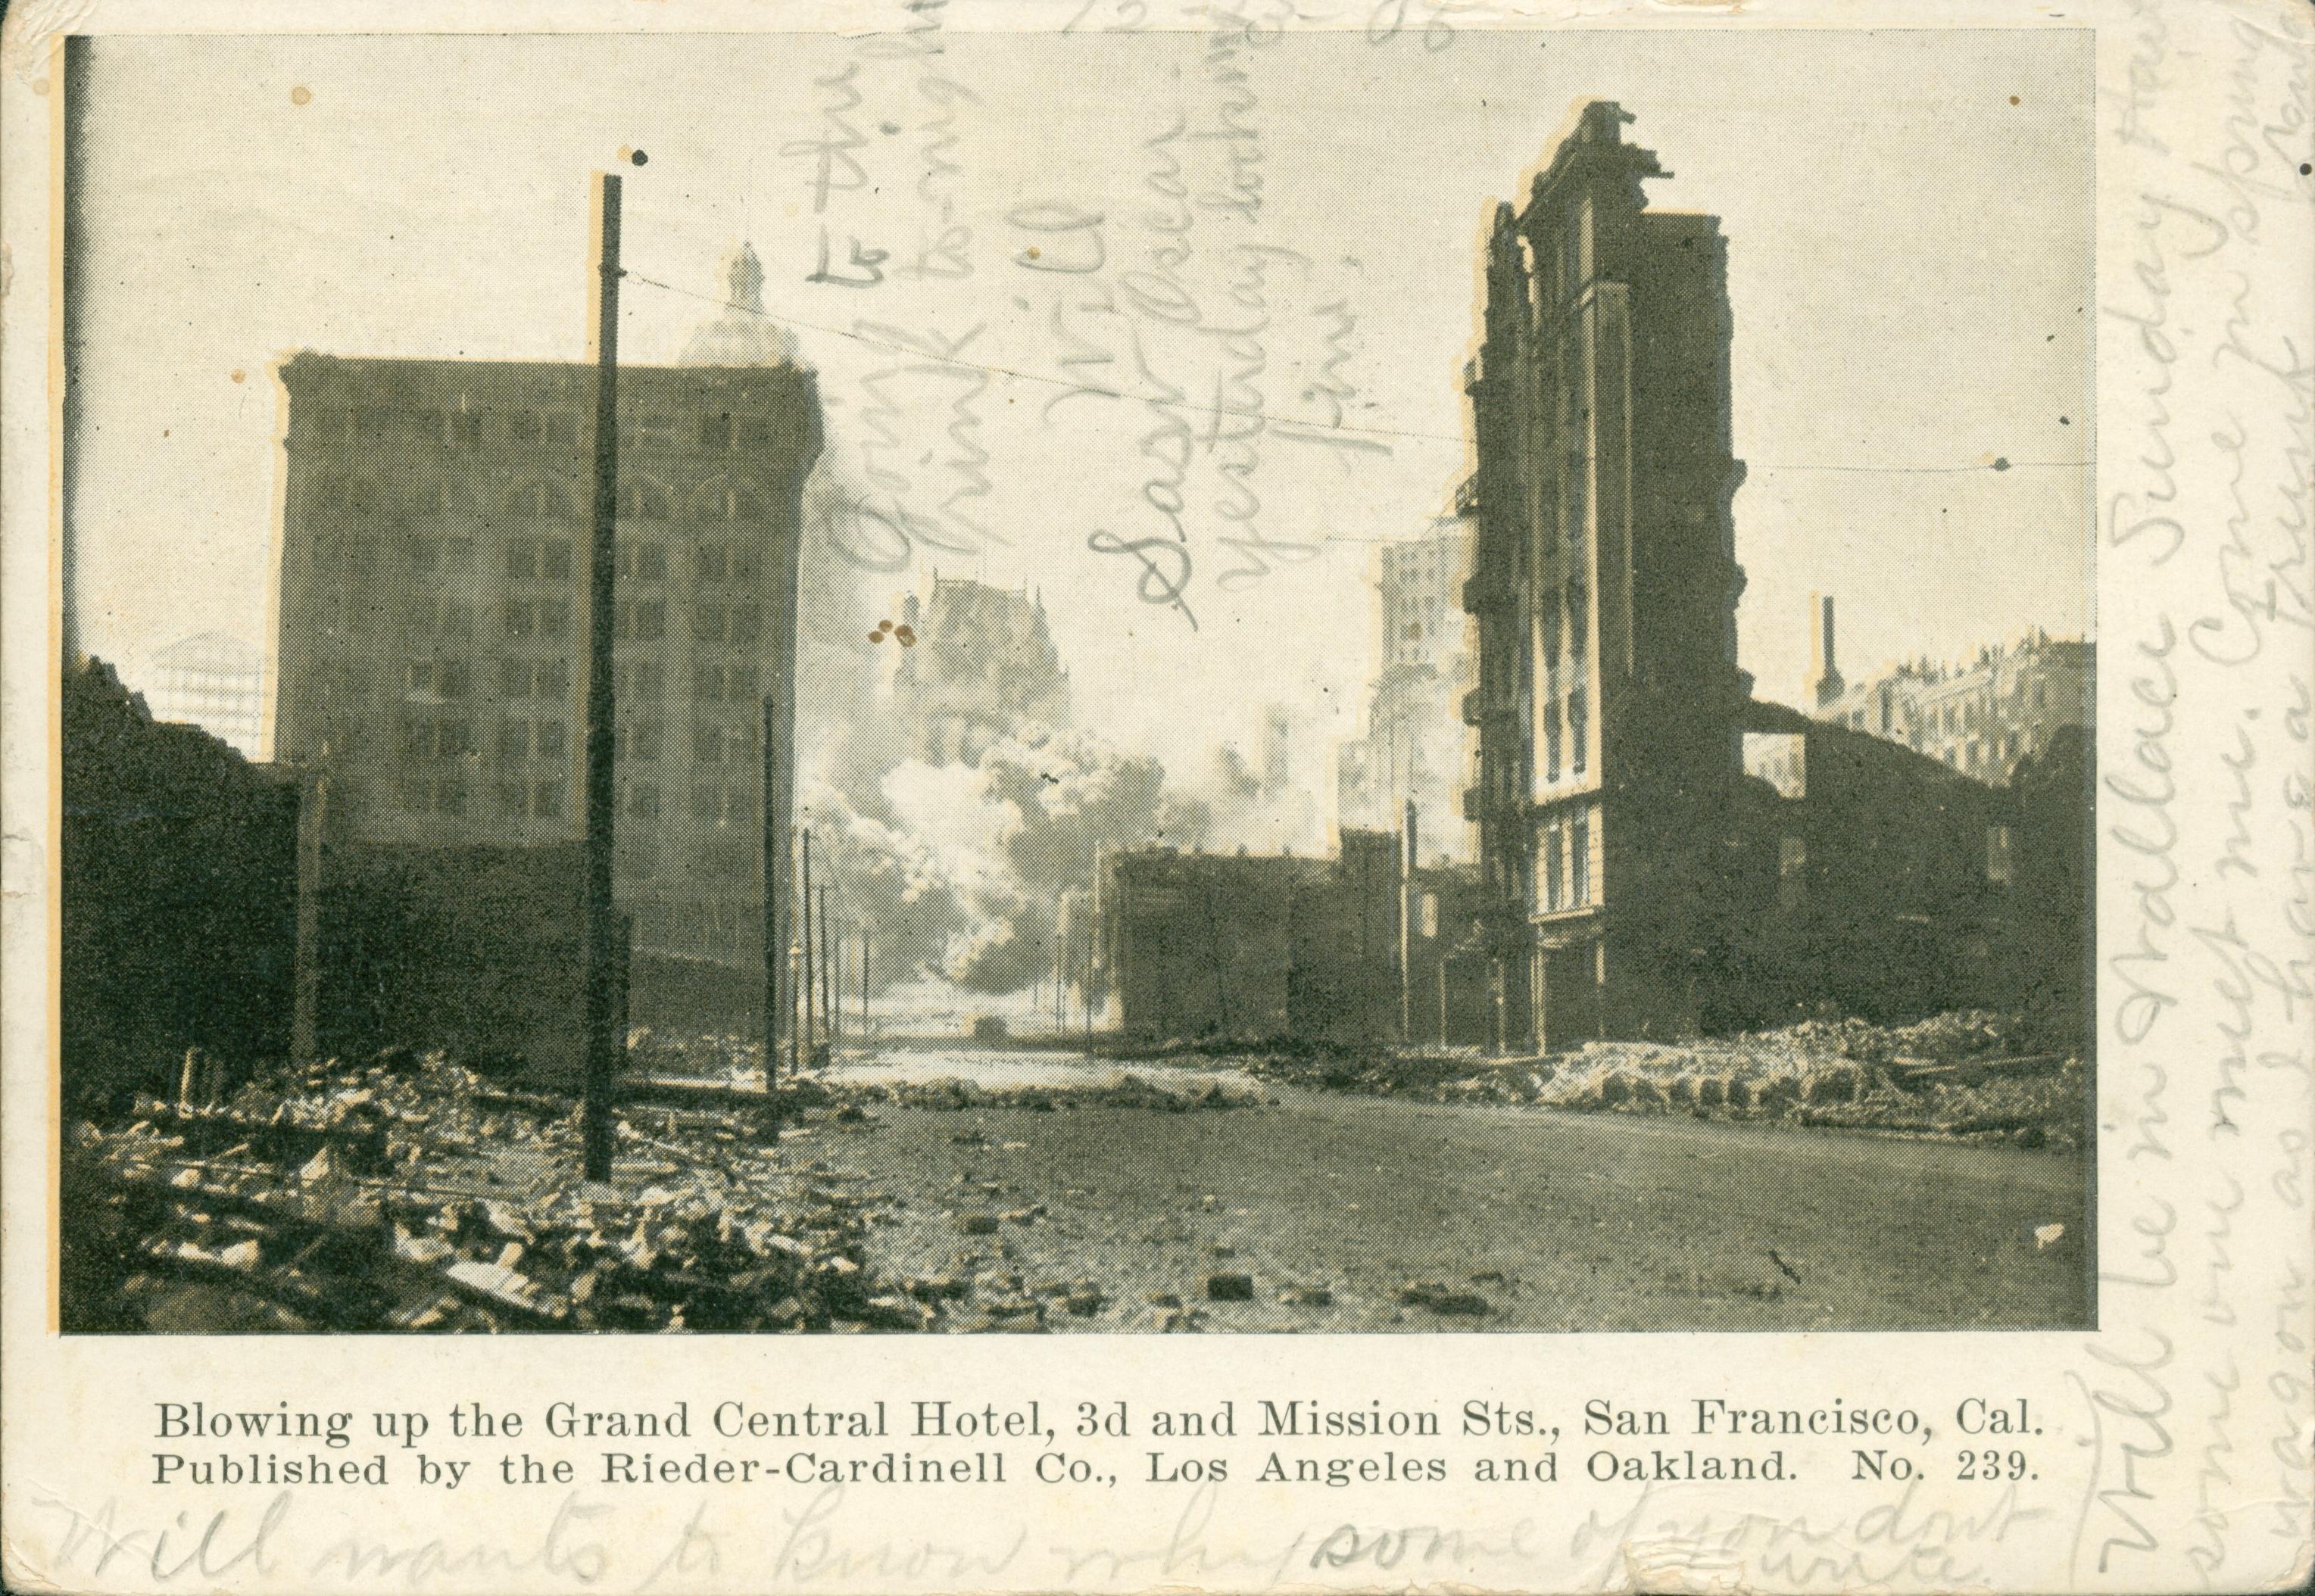 Shows the collapse of the Grand Central Hotel in San Francisco.